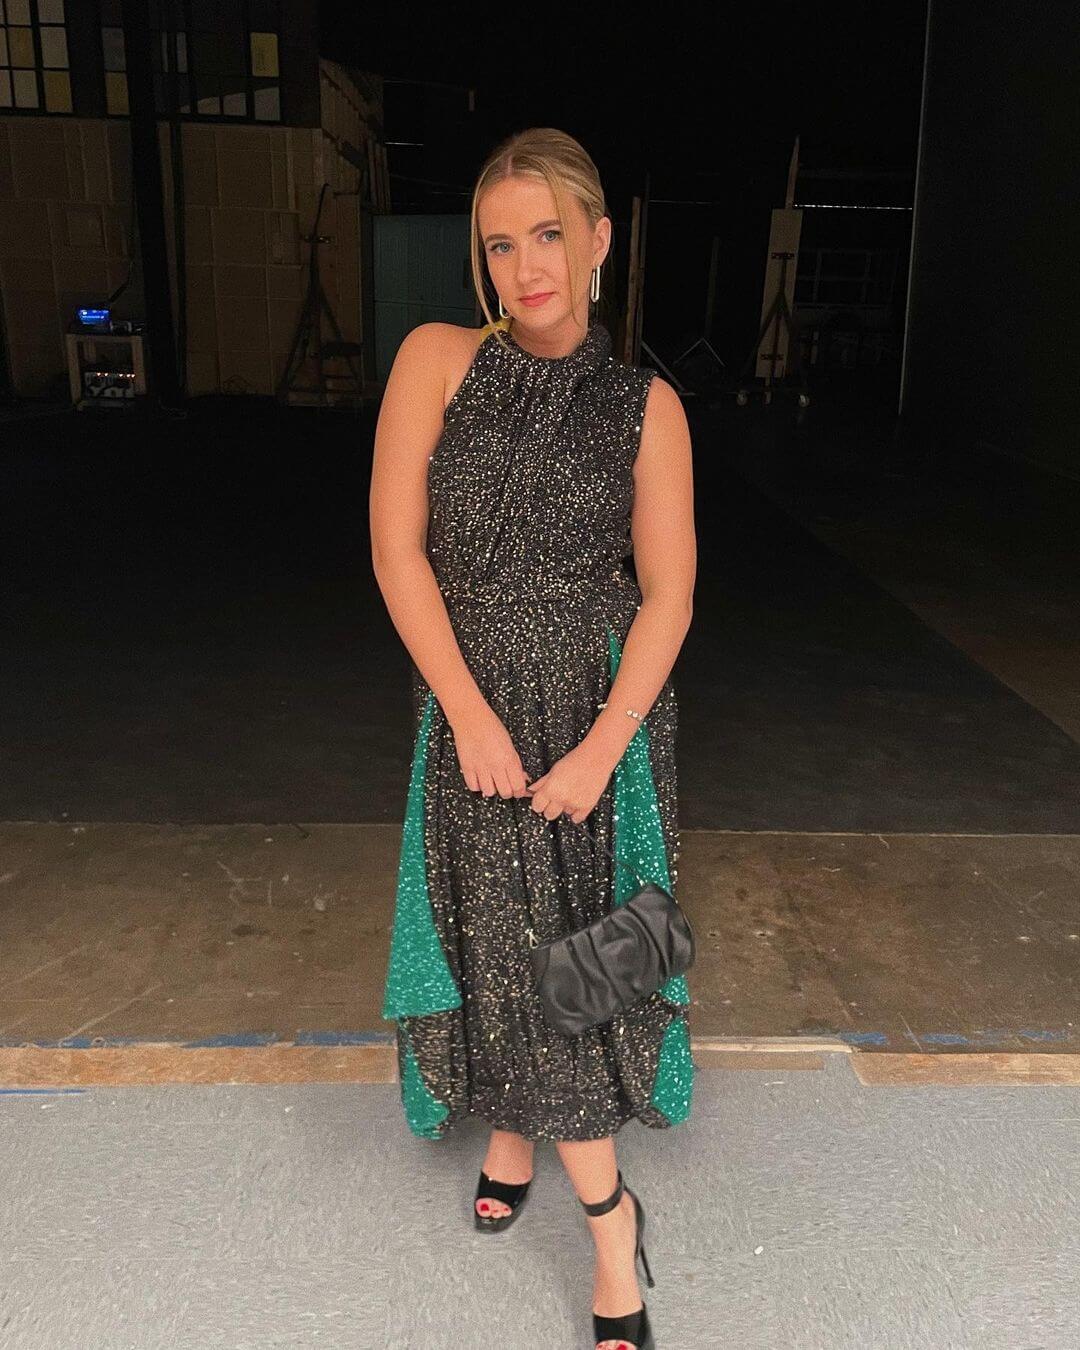 Casually Fabulous - Taking Style Inspiration from Eliza Bennett's A-Line Dress